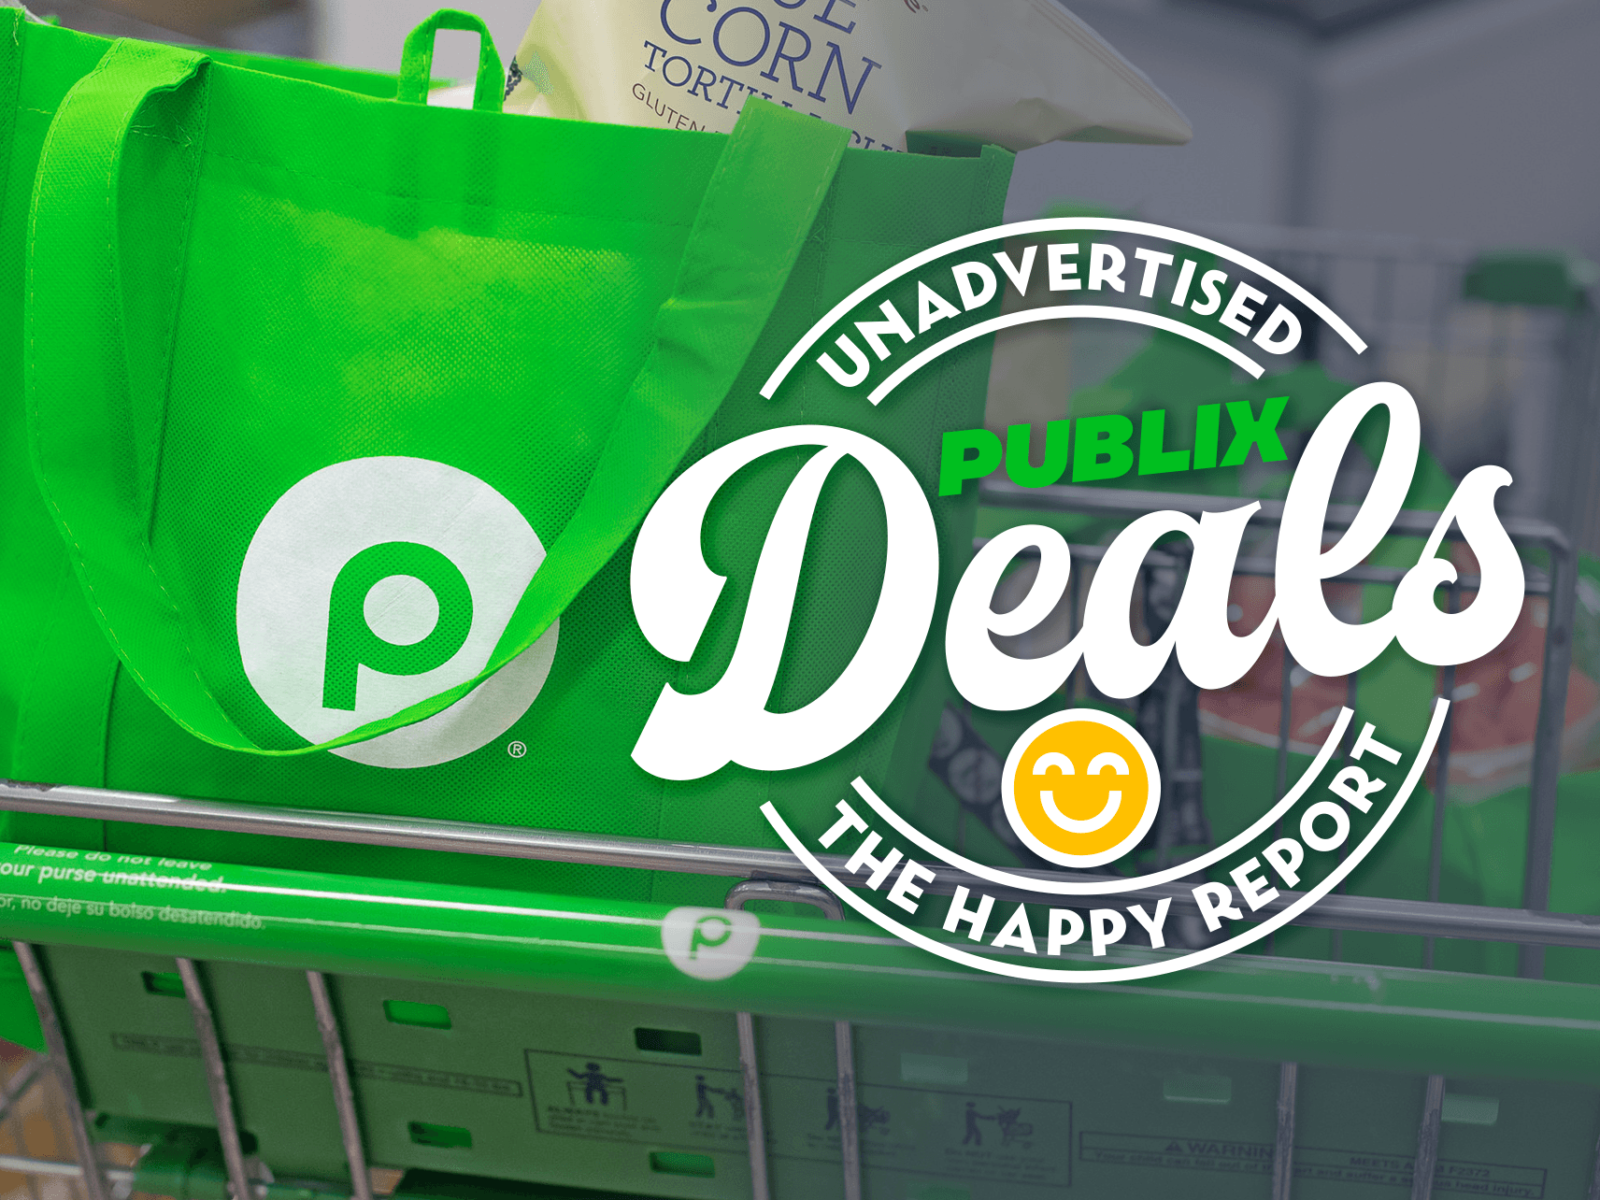 Unadvertised Publix Deals 9/6 – The Happy Report